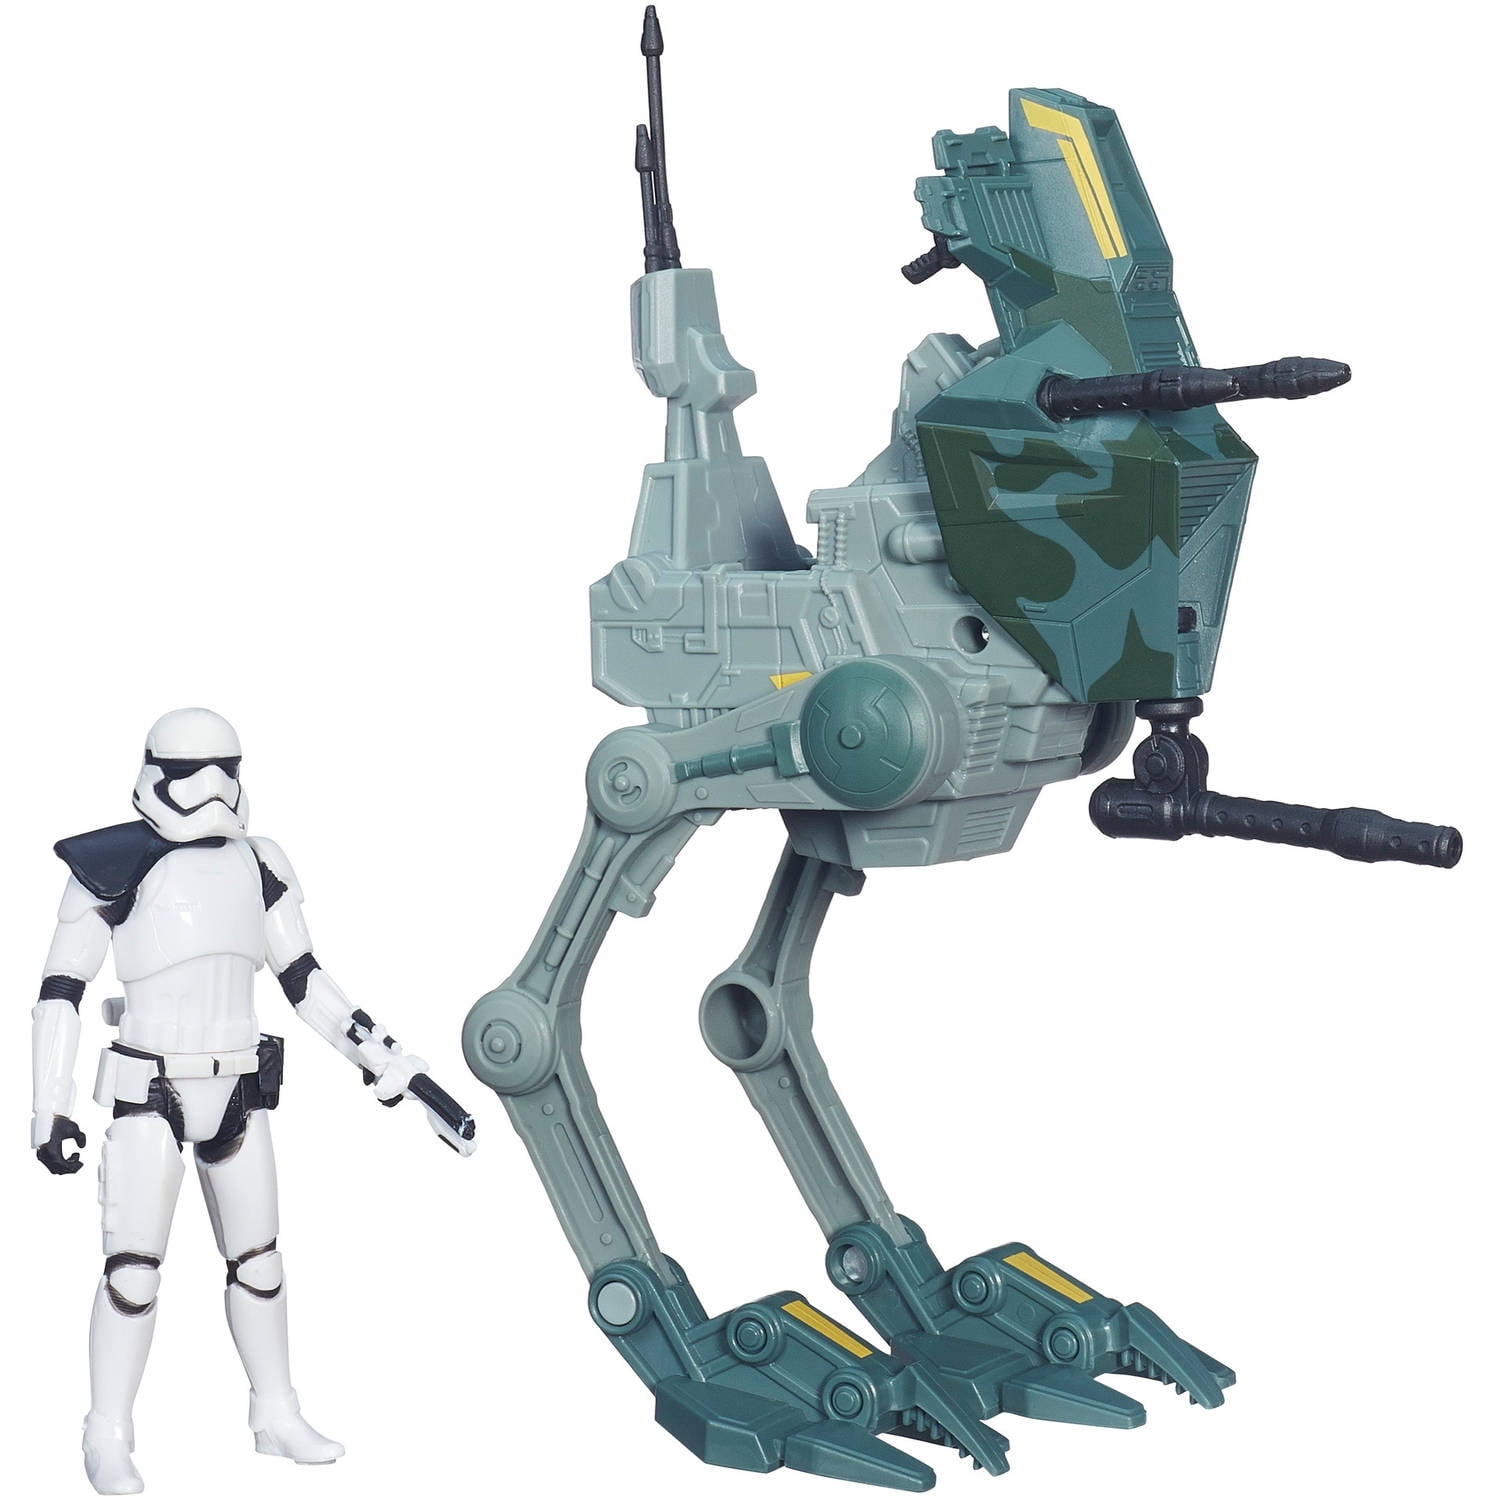 STAR WARS Black Series 3.75 inch IMPERIAL AT-ST WALKER & DRIVER NEW WALMART EXCL 